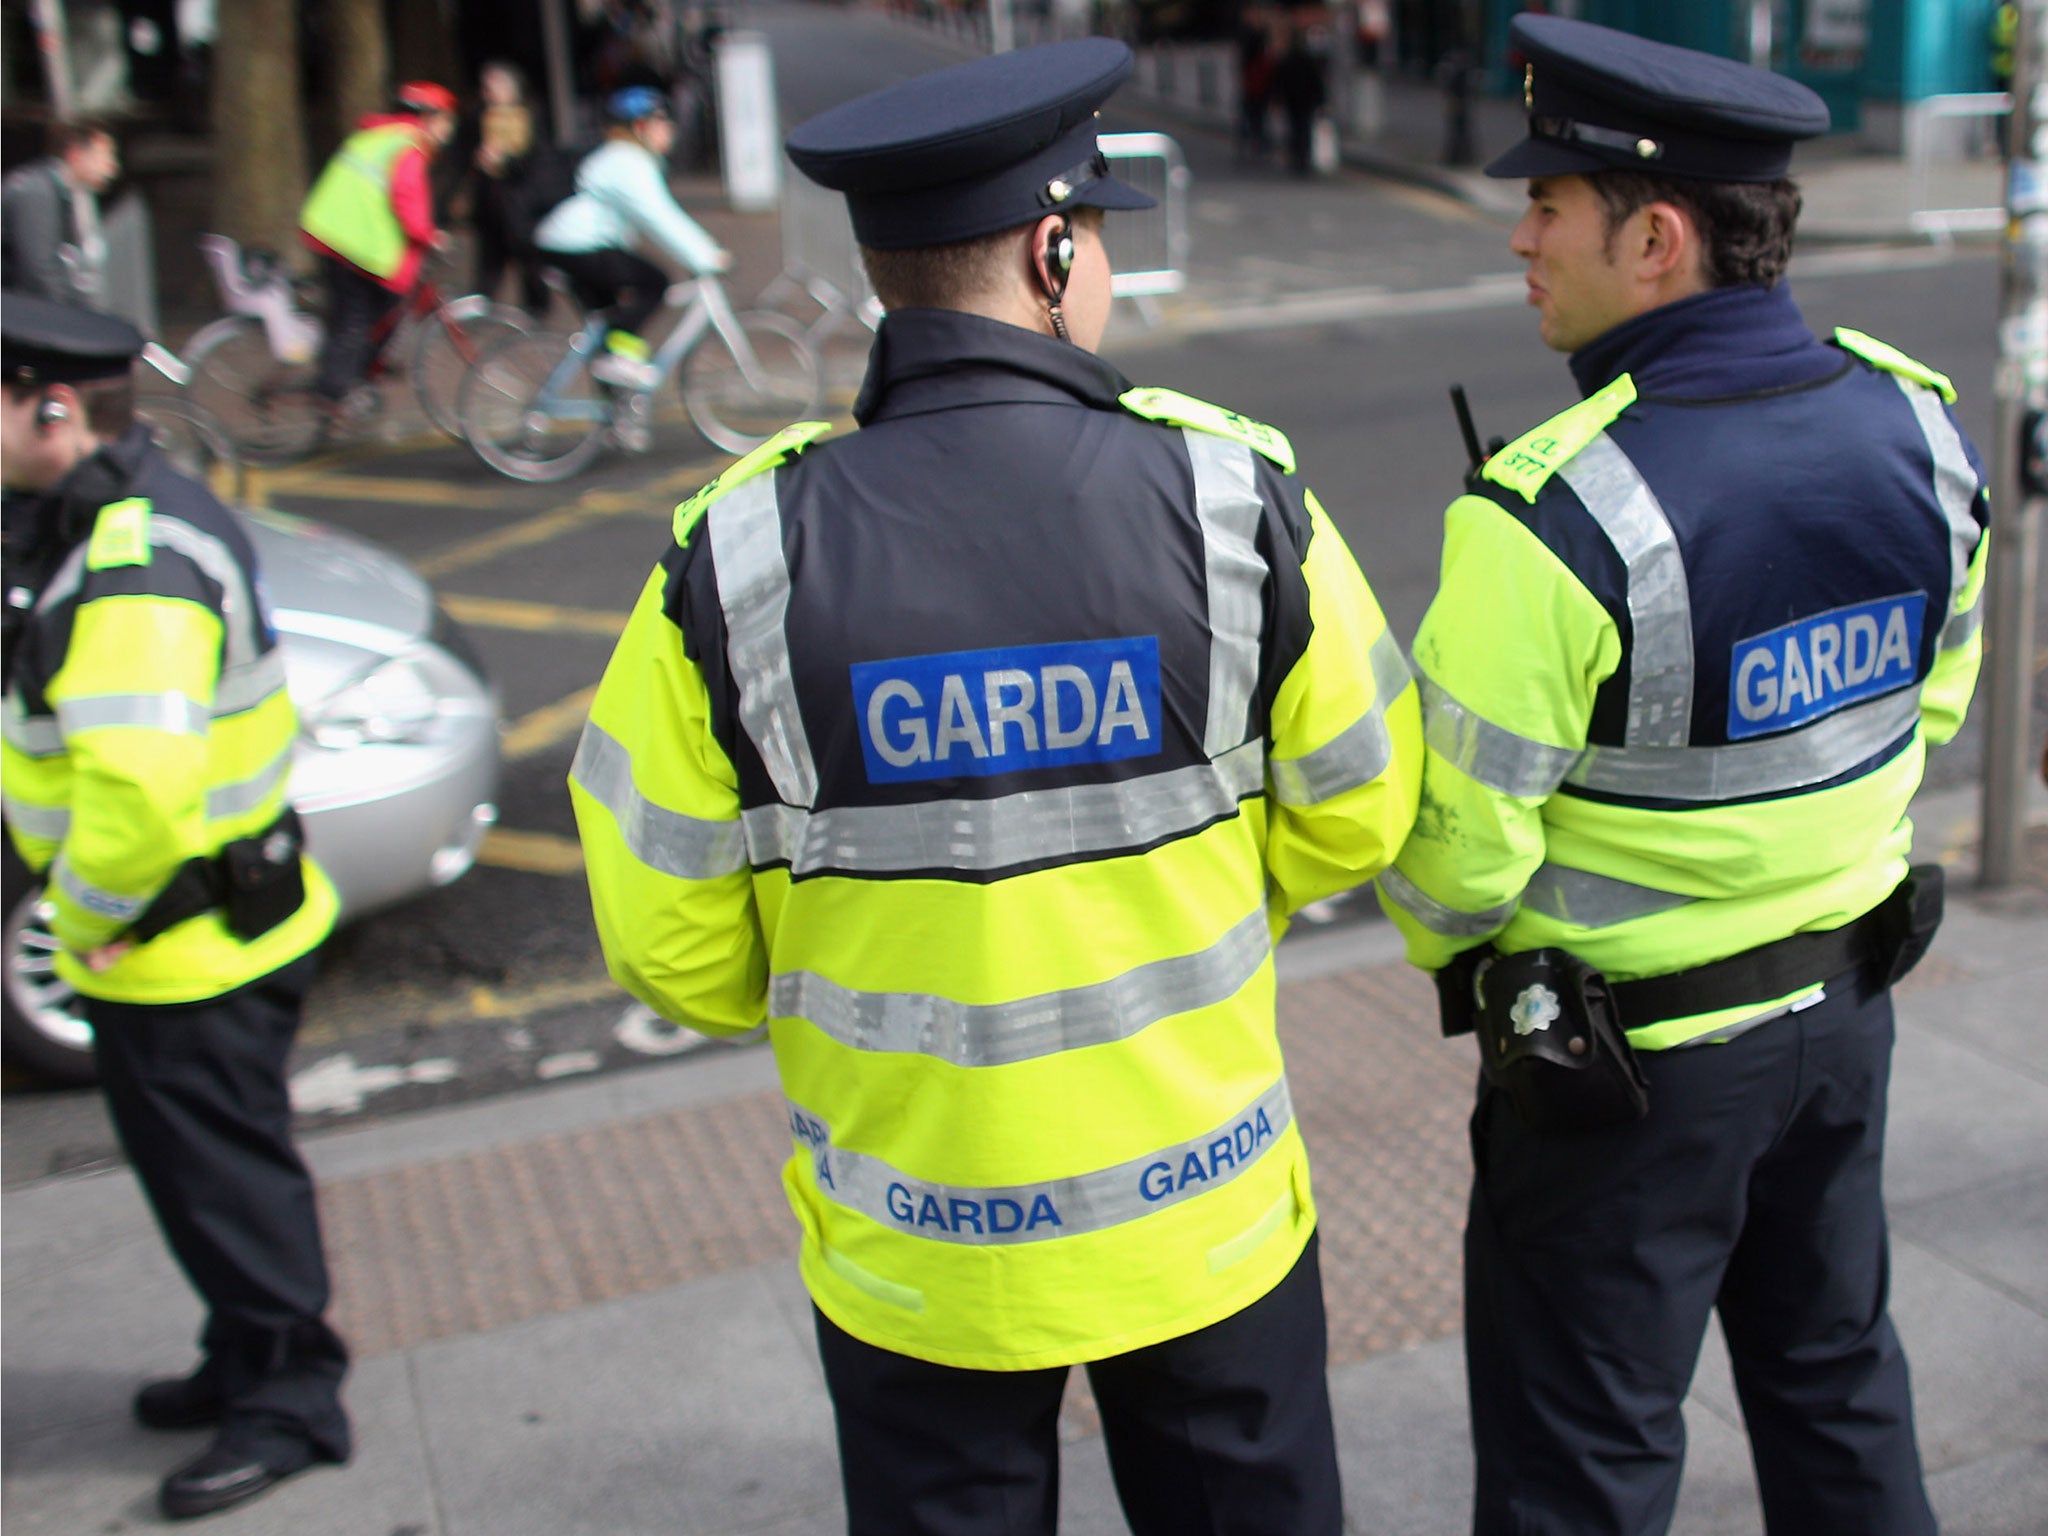 The latest offence took place at a Tesco store in the Rathmines area of the city on 8 July